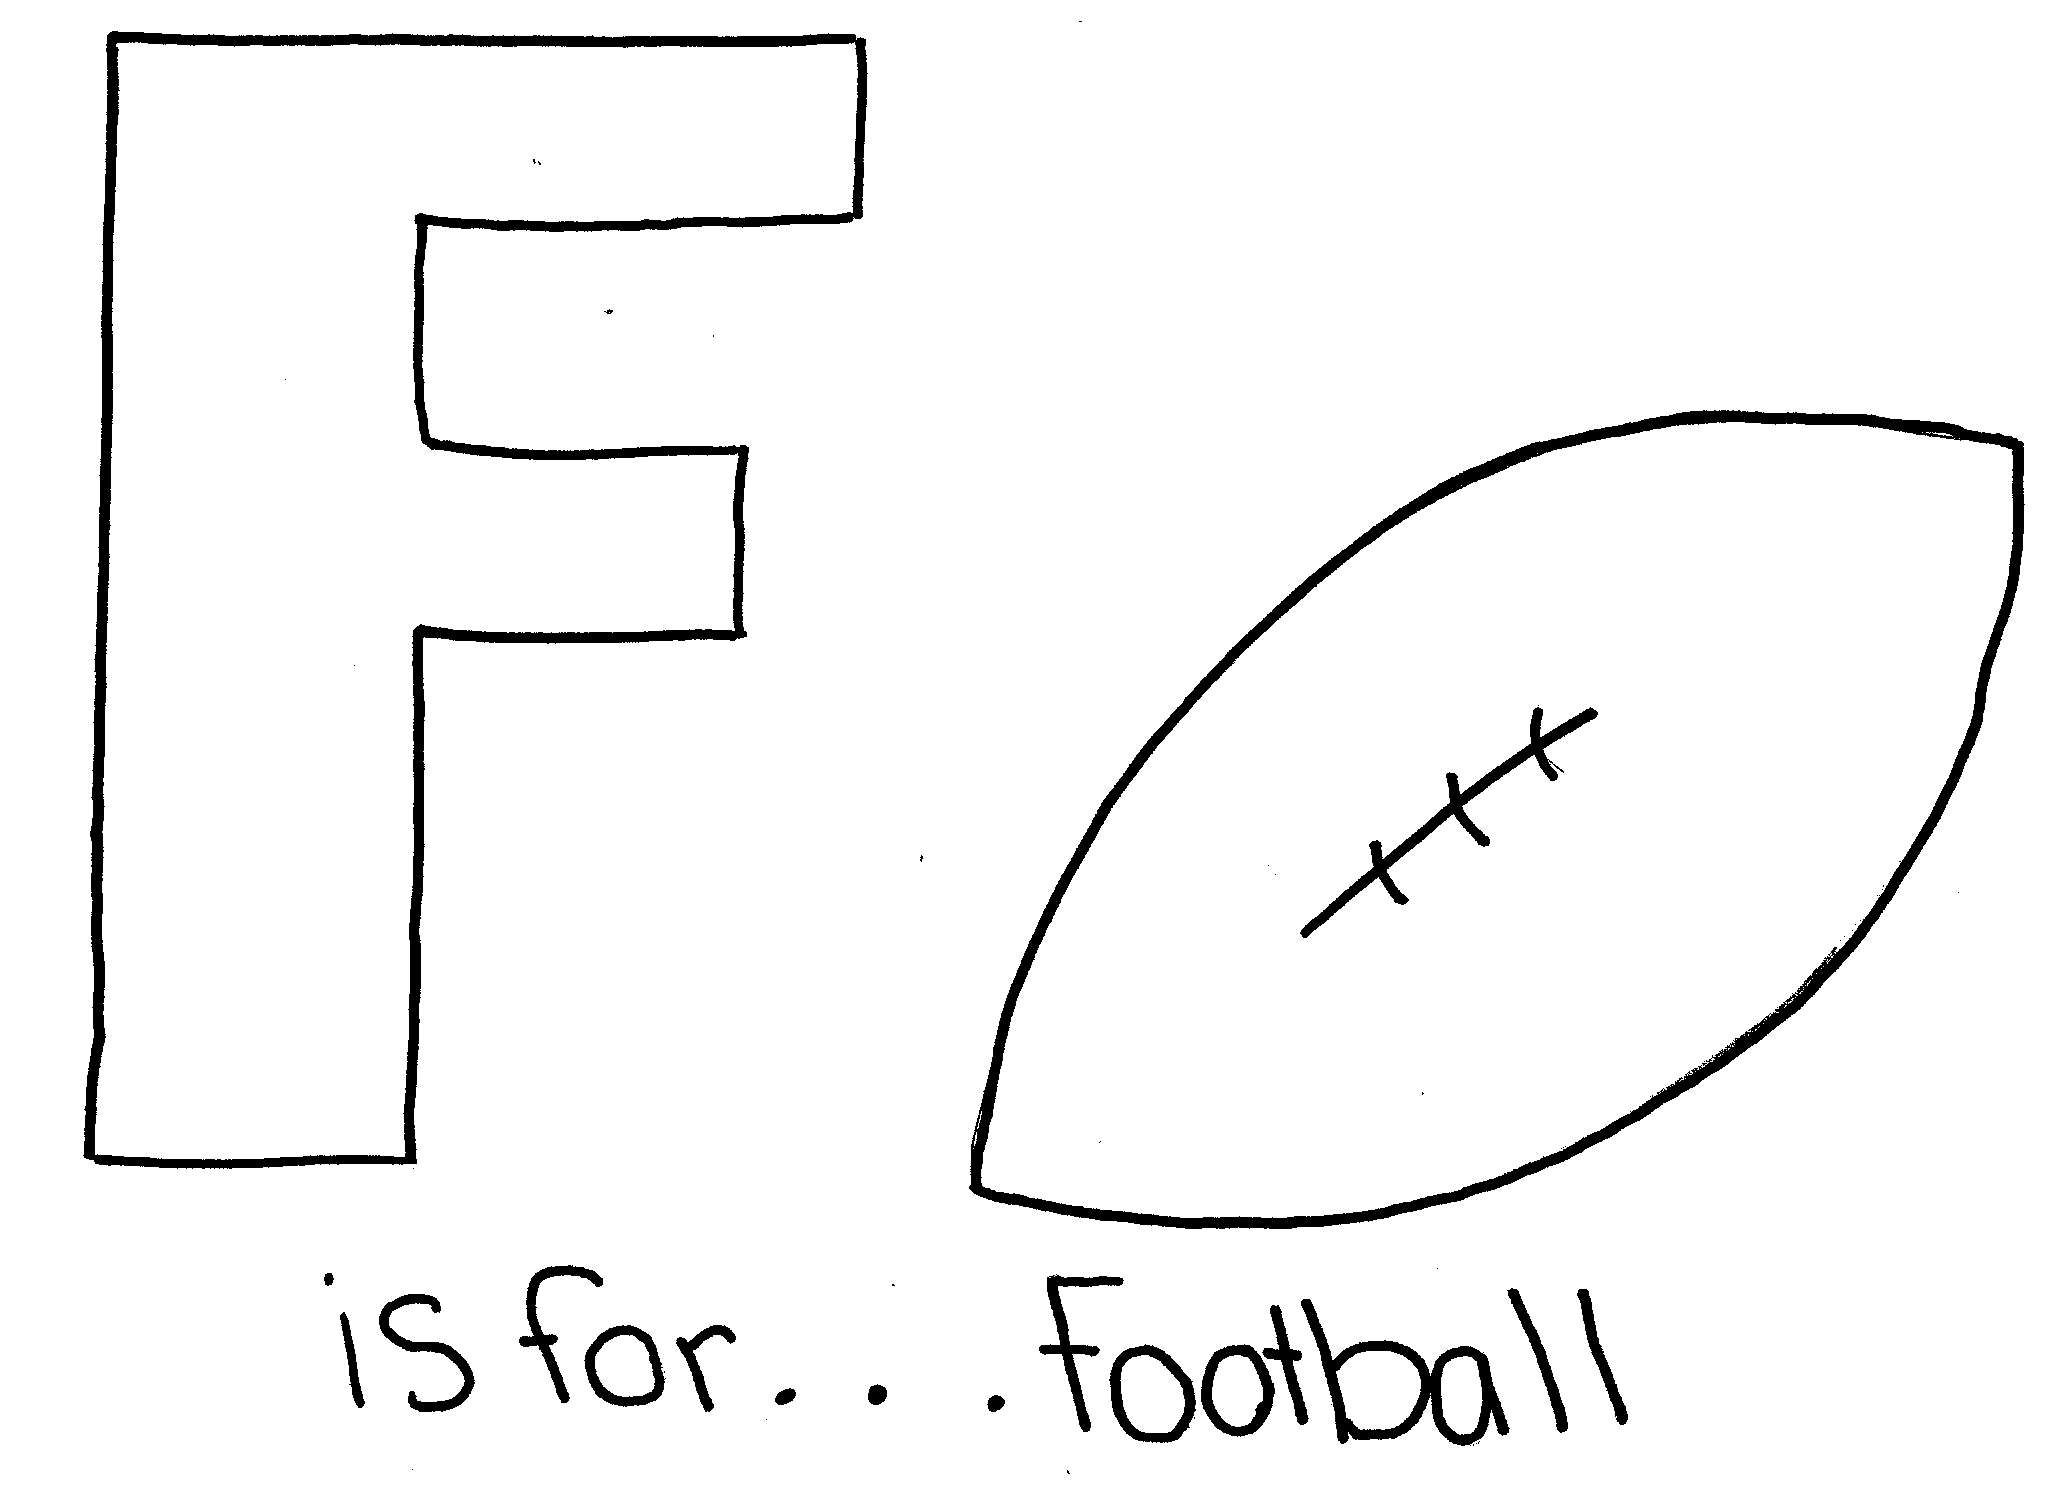 Coloring Pages For The Letter F - Coloring Home